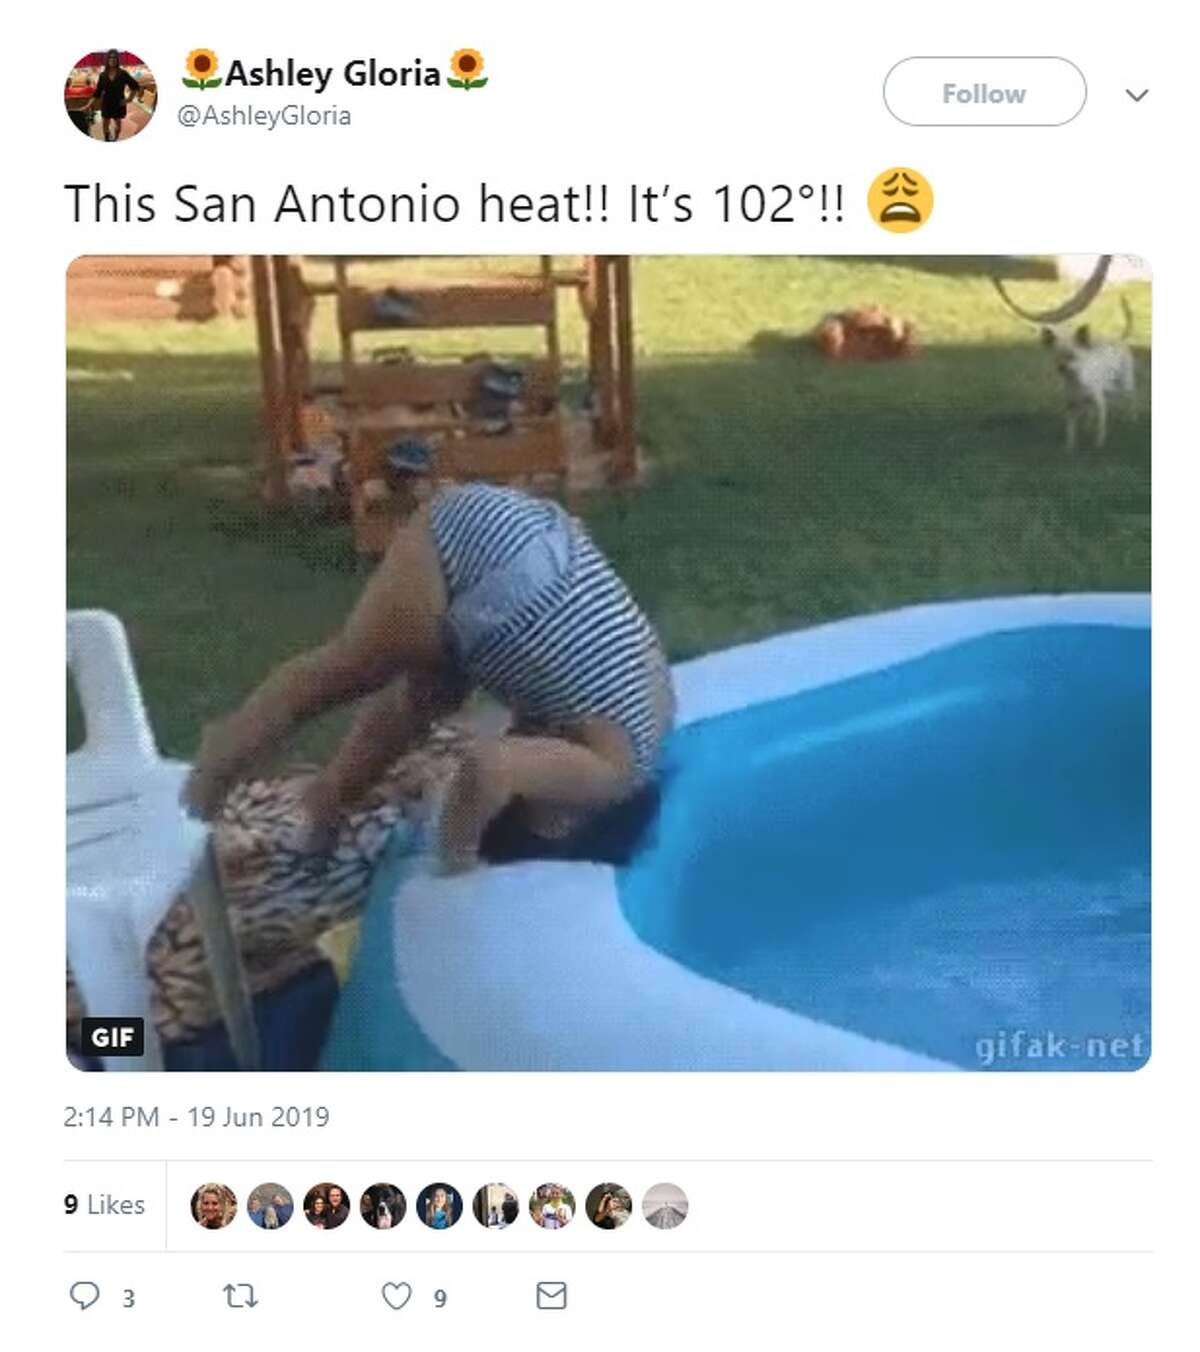 Relatable tweets about the San Antonio/South Texas heat